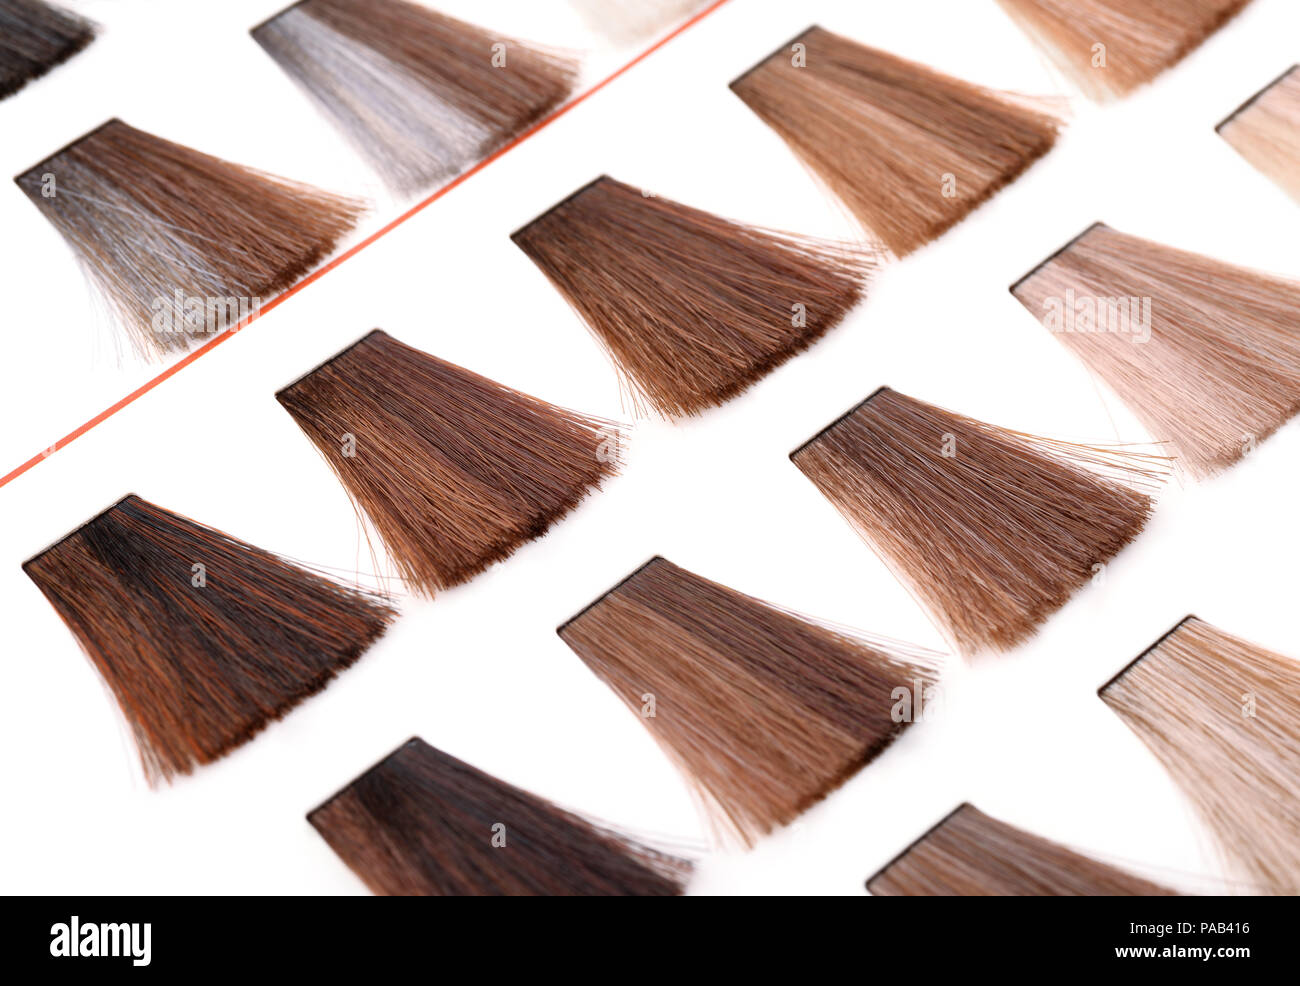 Palette of hair color dye samples isolated on white Stock Photo